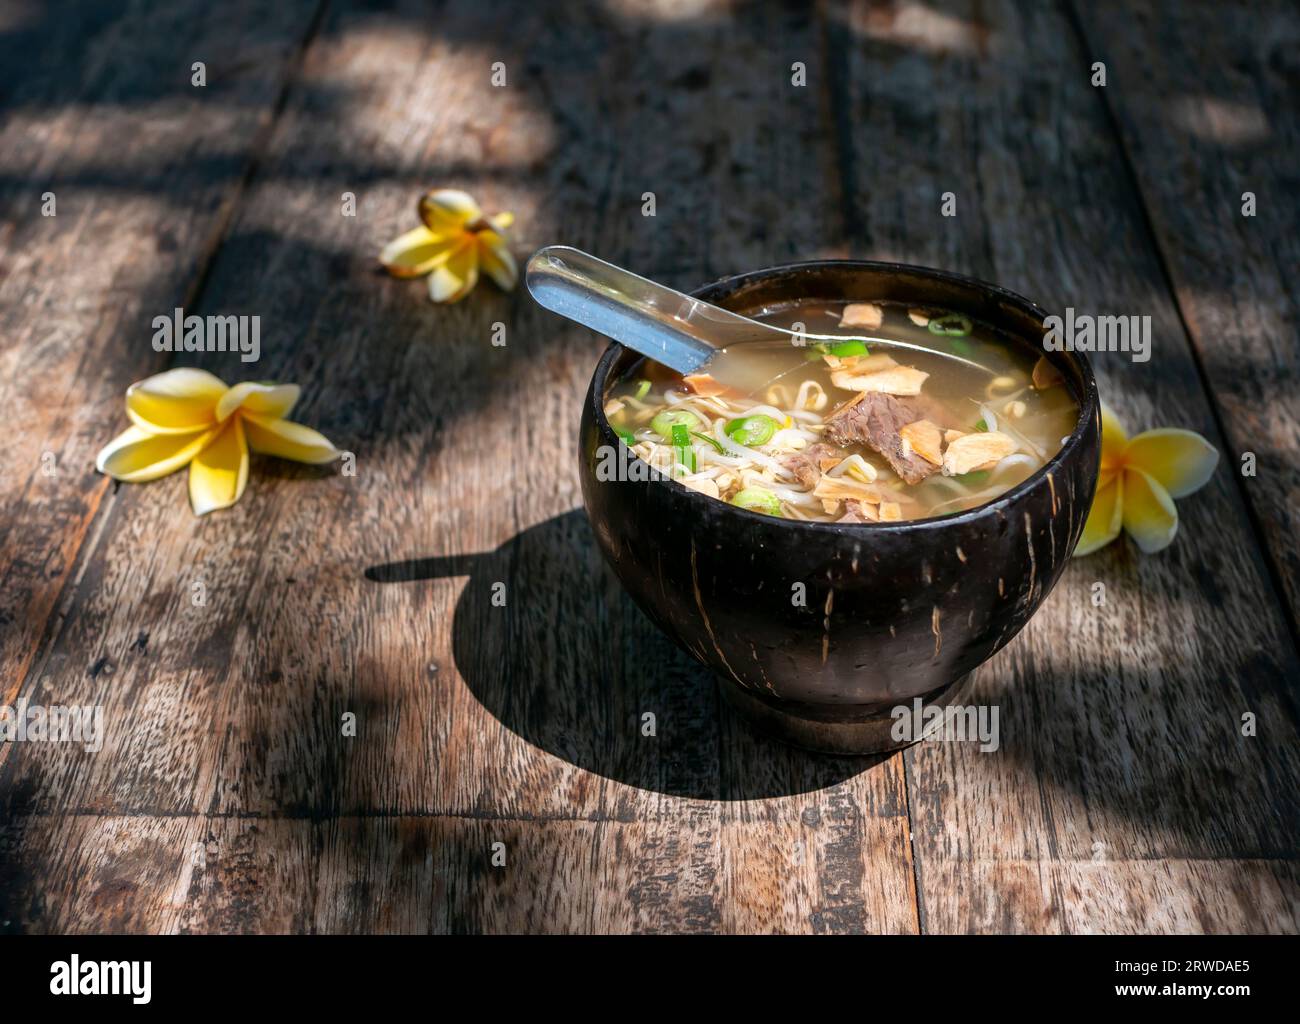 Soto Batok, a traditional Javanese beef soup with vegetables and rice, served in a traditional bowl made of coconut shell. Stock Photo